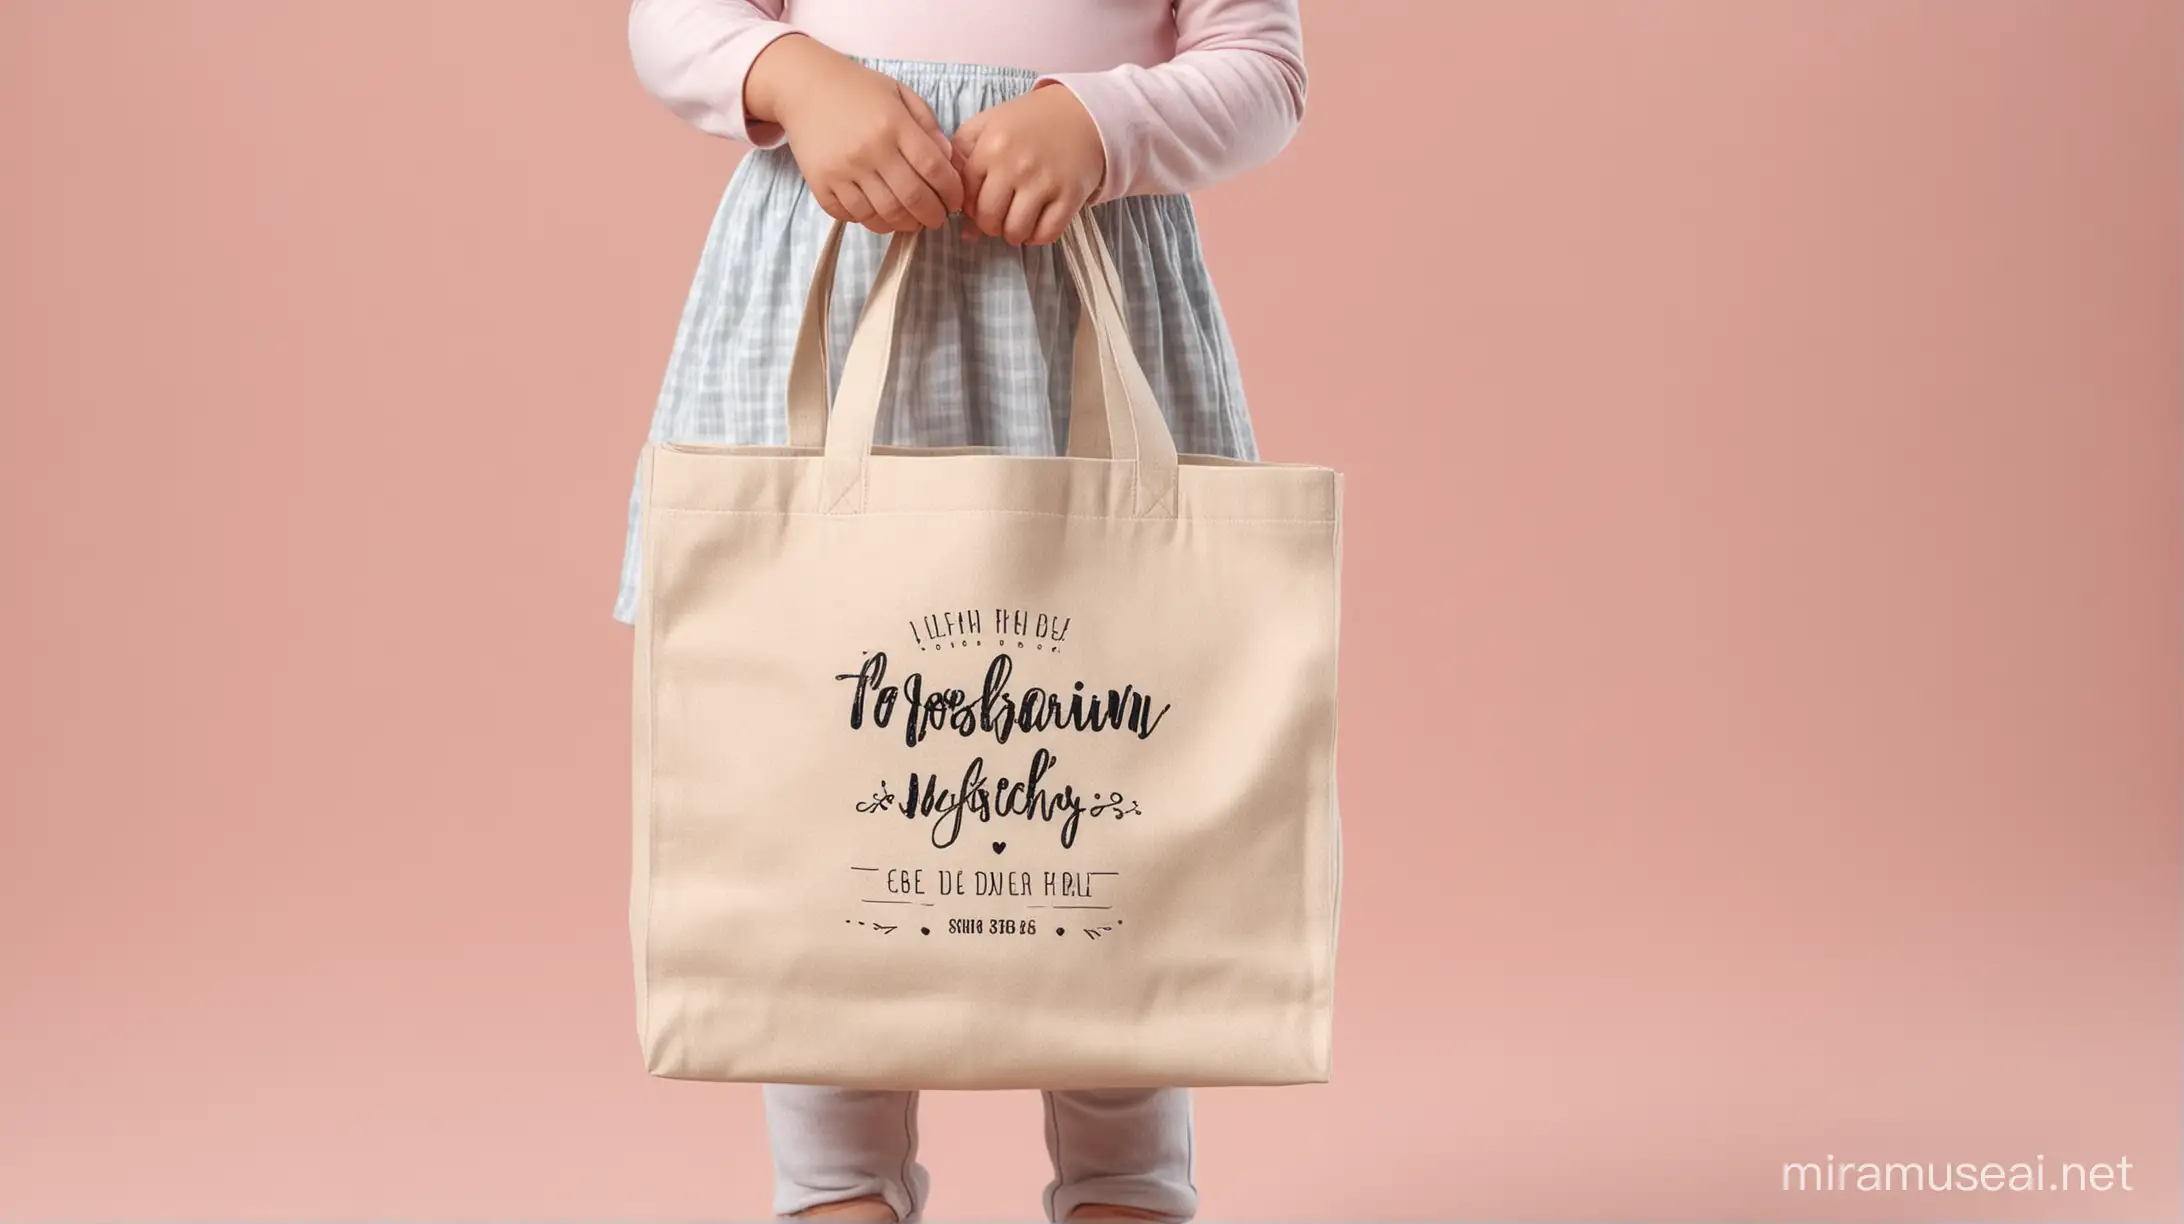 Adorable Toddler Girl with Colorful Tote Shopping Bag Mockup